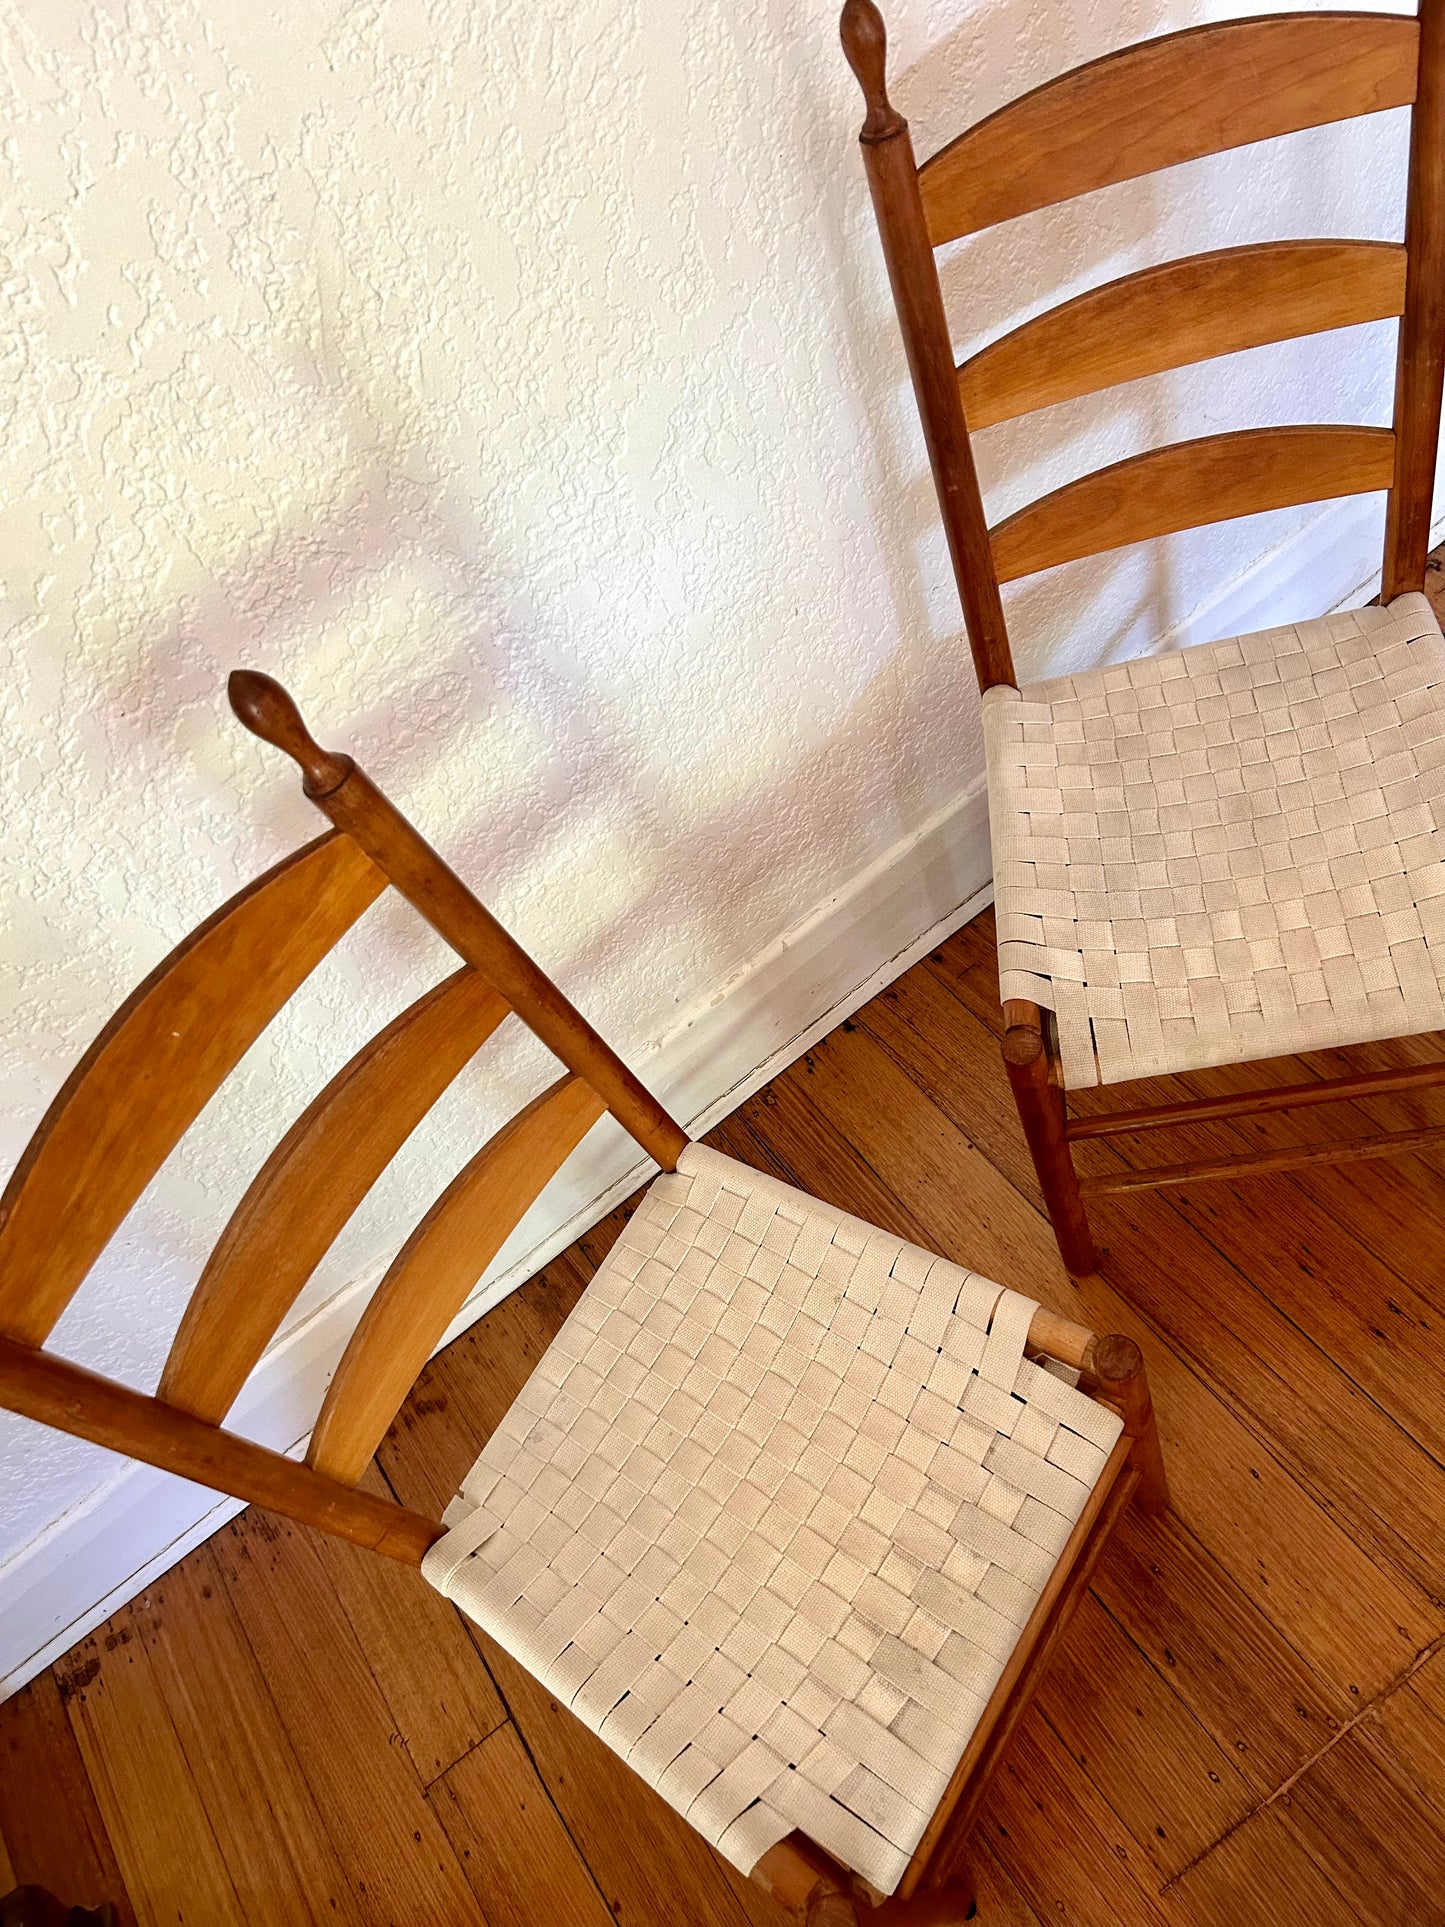 Shaker Style Ladderback Chairs - Six Available